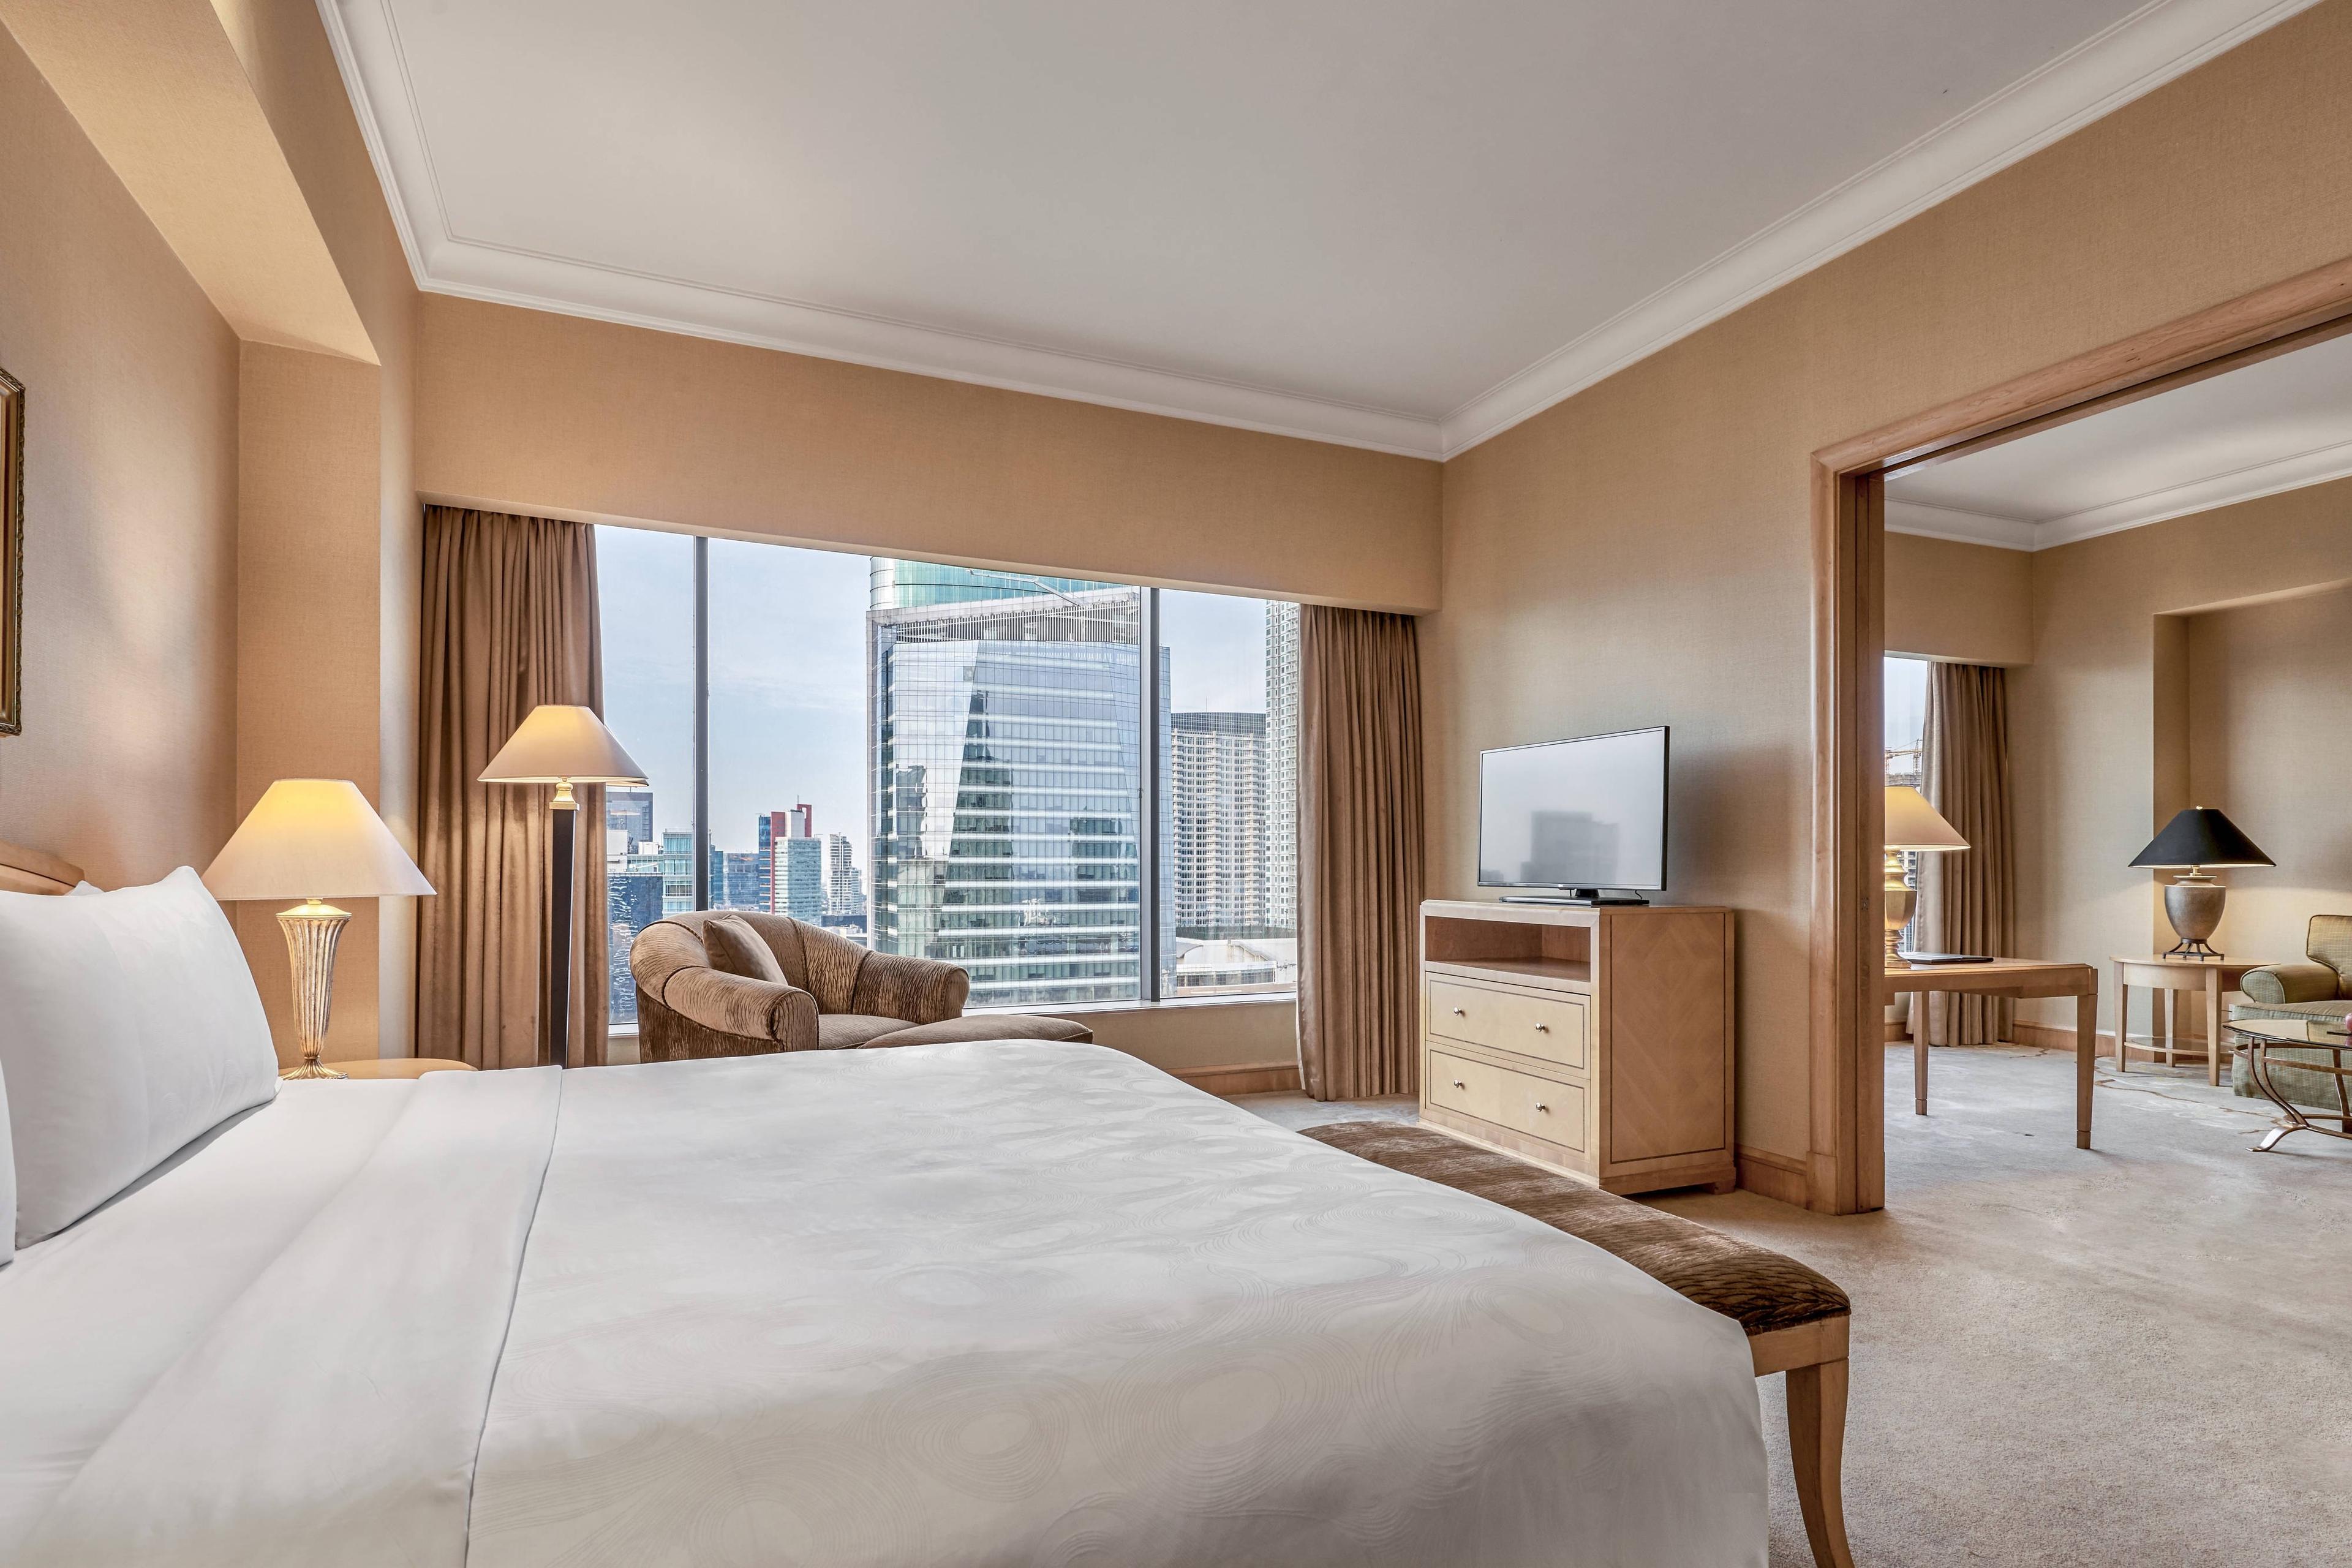 Our Governor Suite offers 84 square meters of space, and a private bedroom with king-size bed and a view of the city.